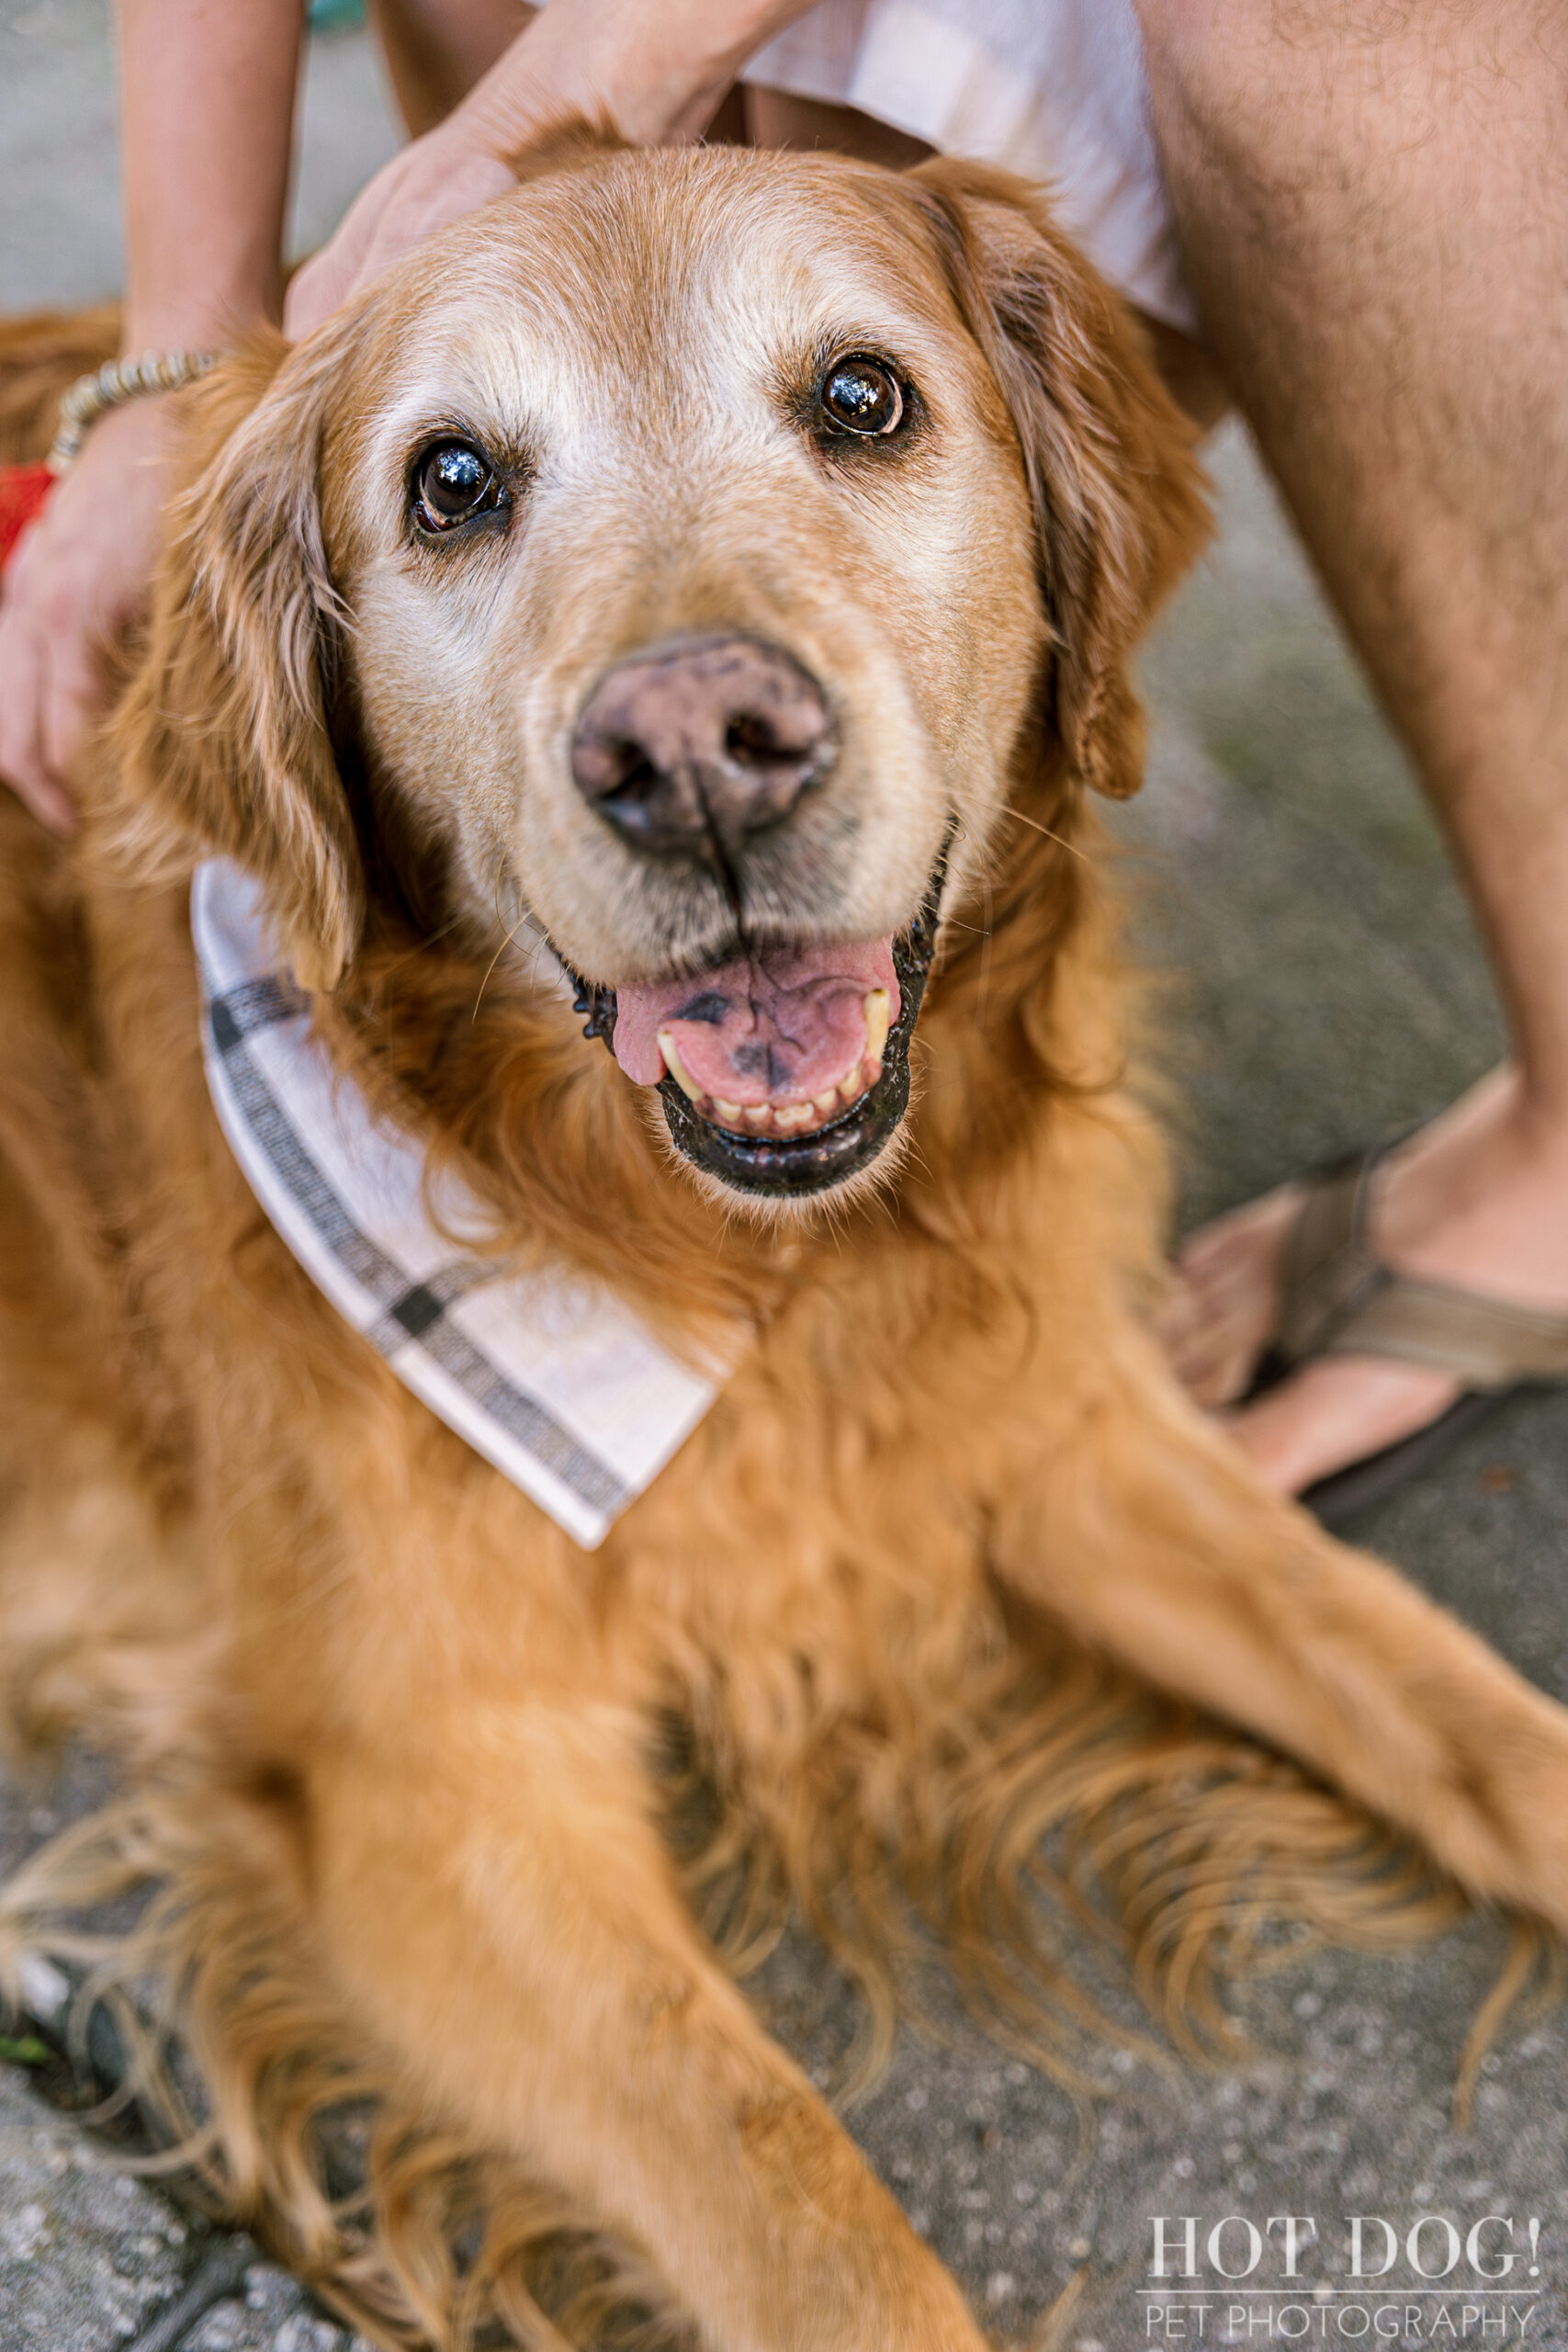 Time Stands Still: Amidst the bustling Celebration Town Square, a timeless bond shines through as senior golden retriever Osho and his parents bask in a moment of pure love. (Photo by Hot Dog! Pet Photography)